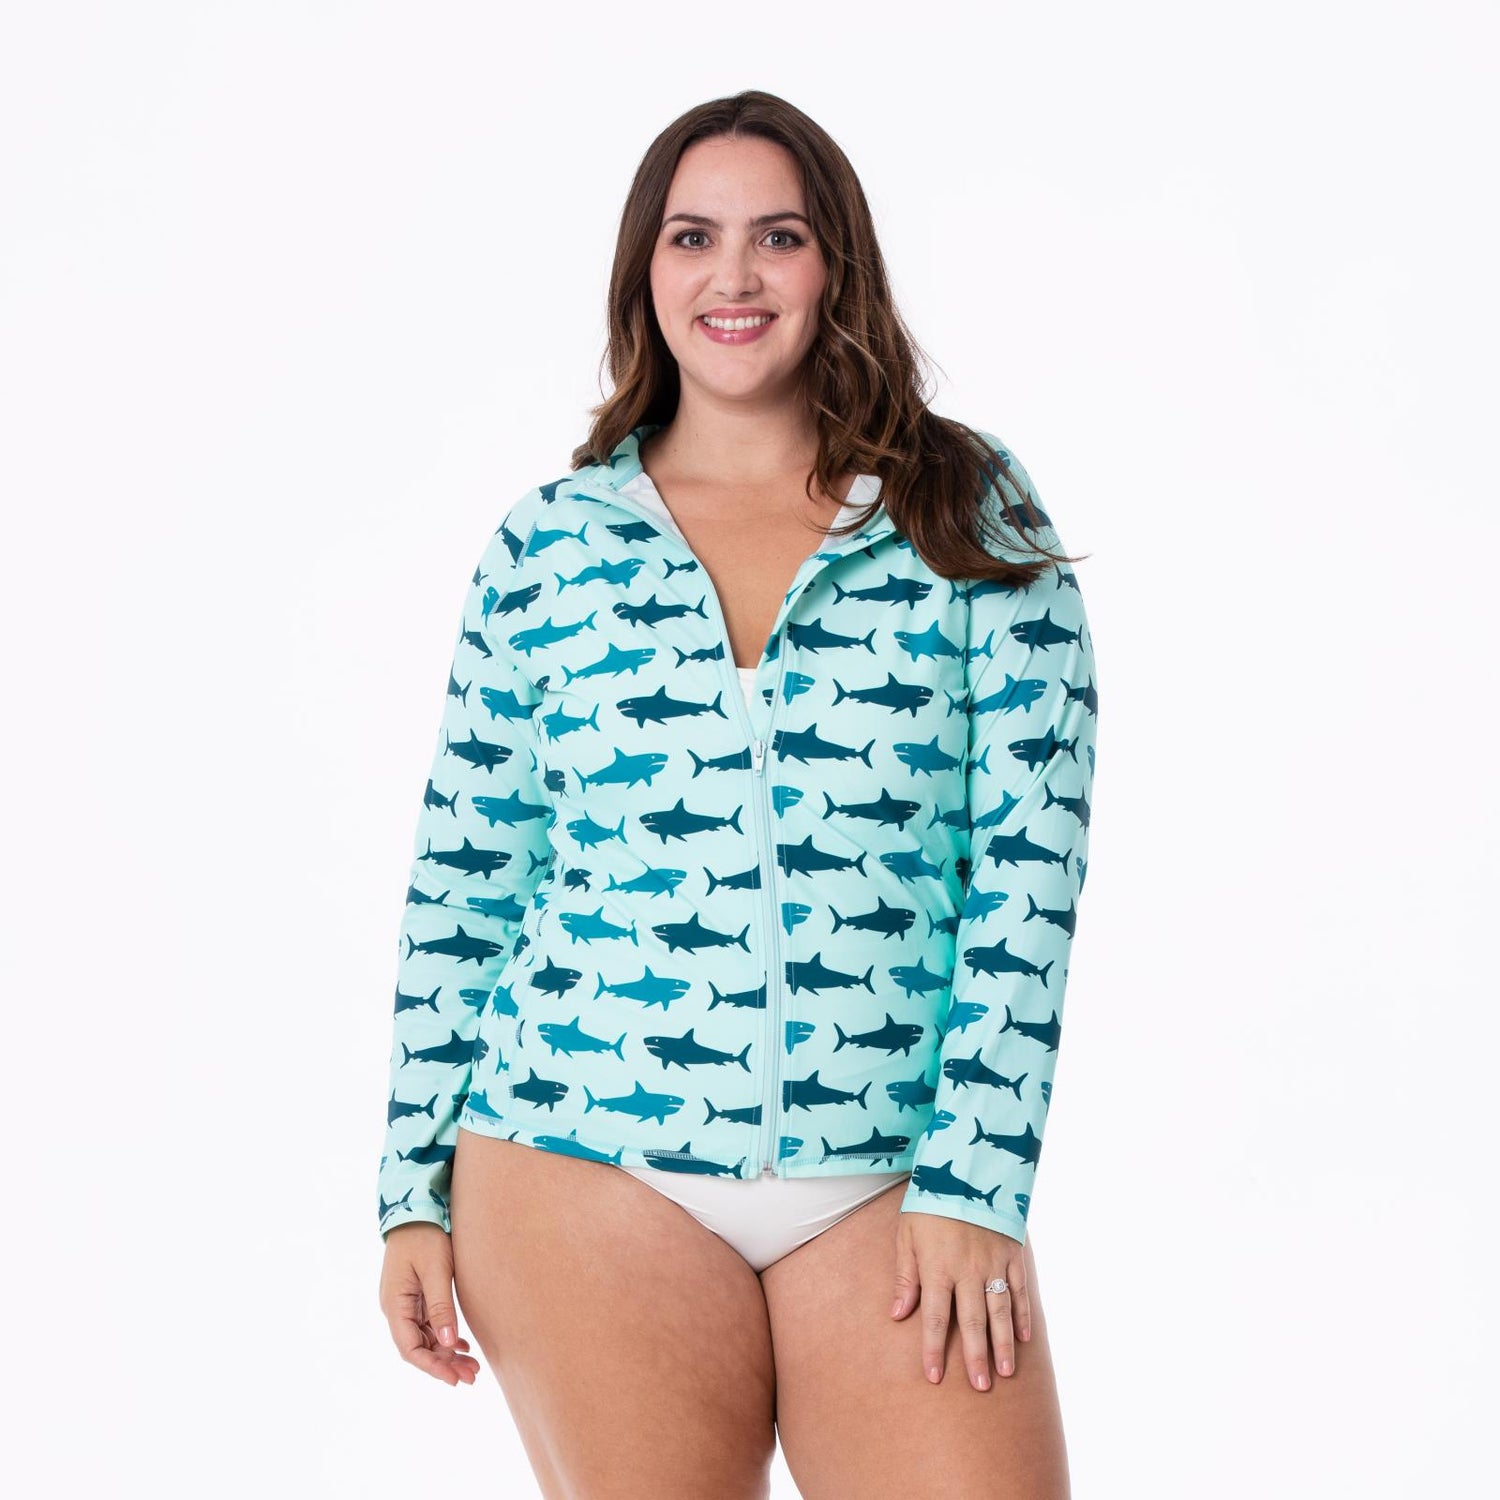 Women's Print Long Sleeve Swim and Sun Cover Up in Summer Sky Megalodon